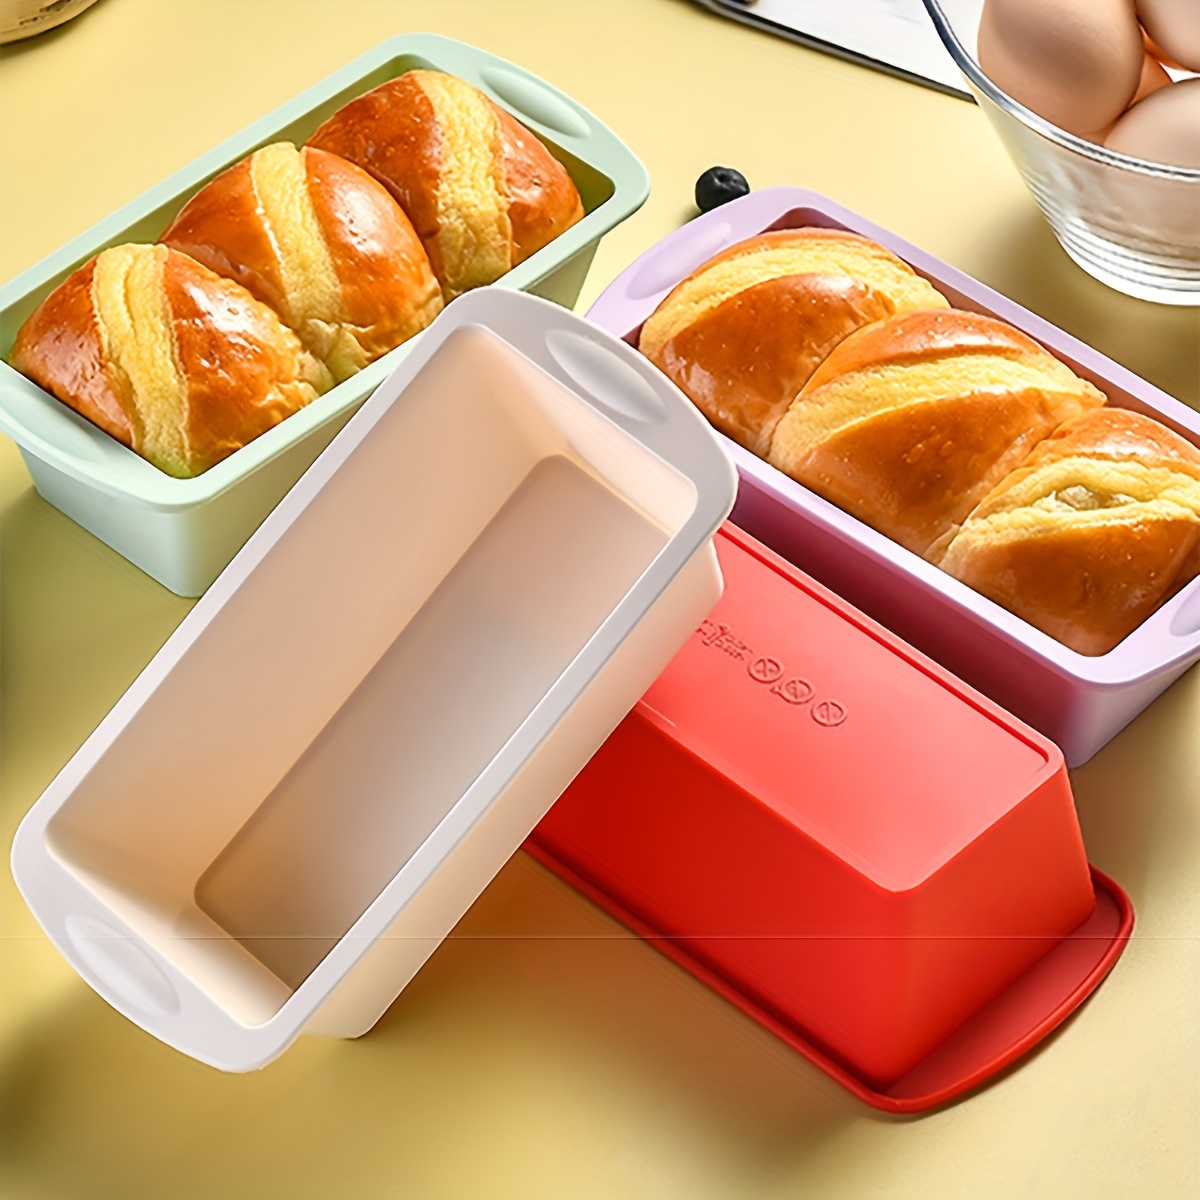 

2pcs Silicone Cake Baking Molds, 7.65''x3.74'', Easy To Release Rectangular Loaf Pan, Household Oven Silicone Baking Tray, Kitchen Baking Tools